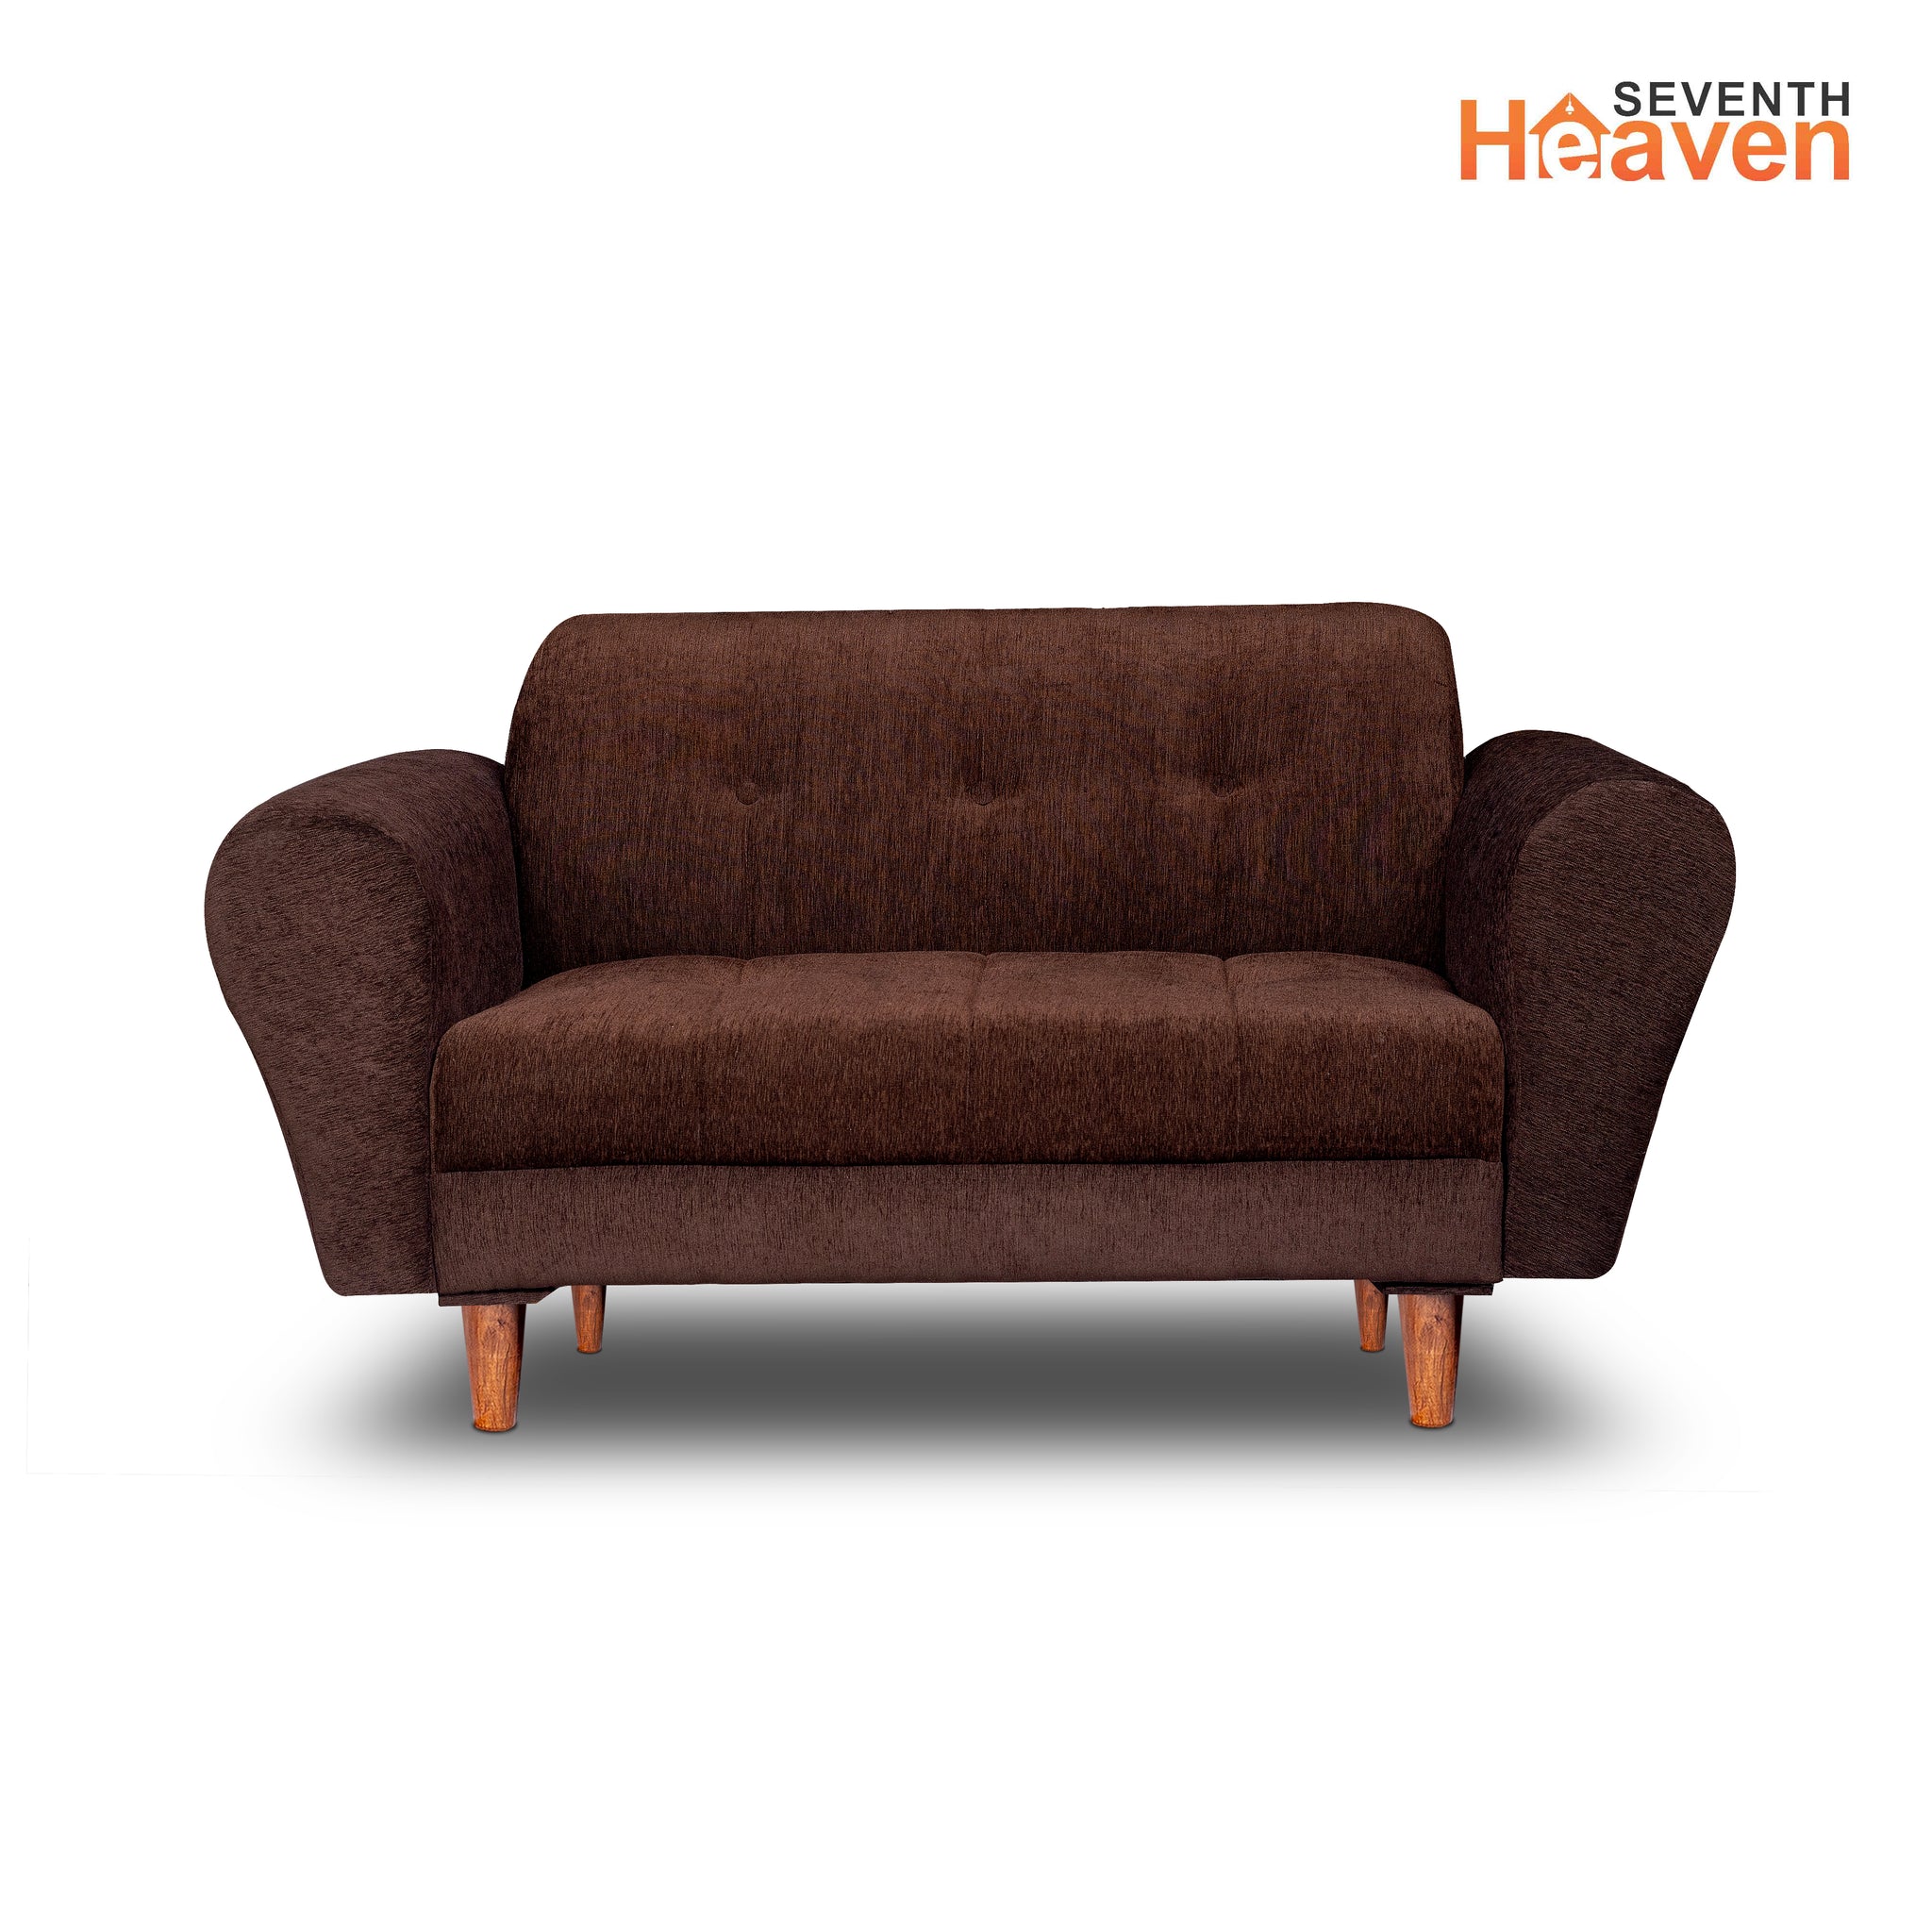 Seventh Heaven Milan 2 Seater Wooden Sofa Set Modern & Elegant Smart Furniture Range for luxurious homes, living rooms and offices. Brown Colour Molphino fabric with sheesham polished wooden legs.